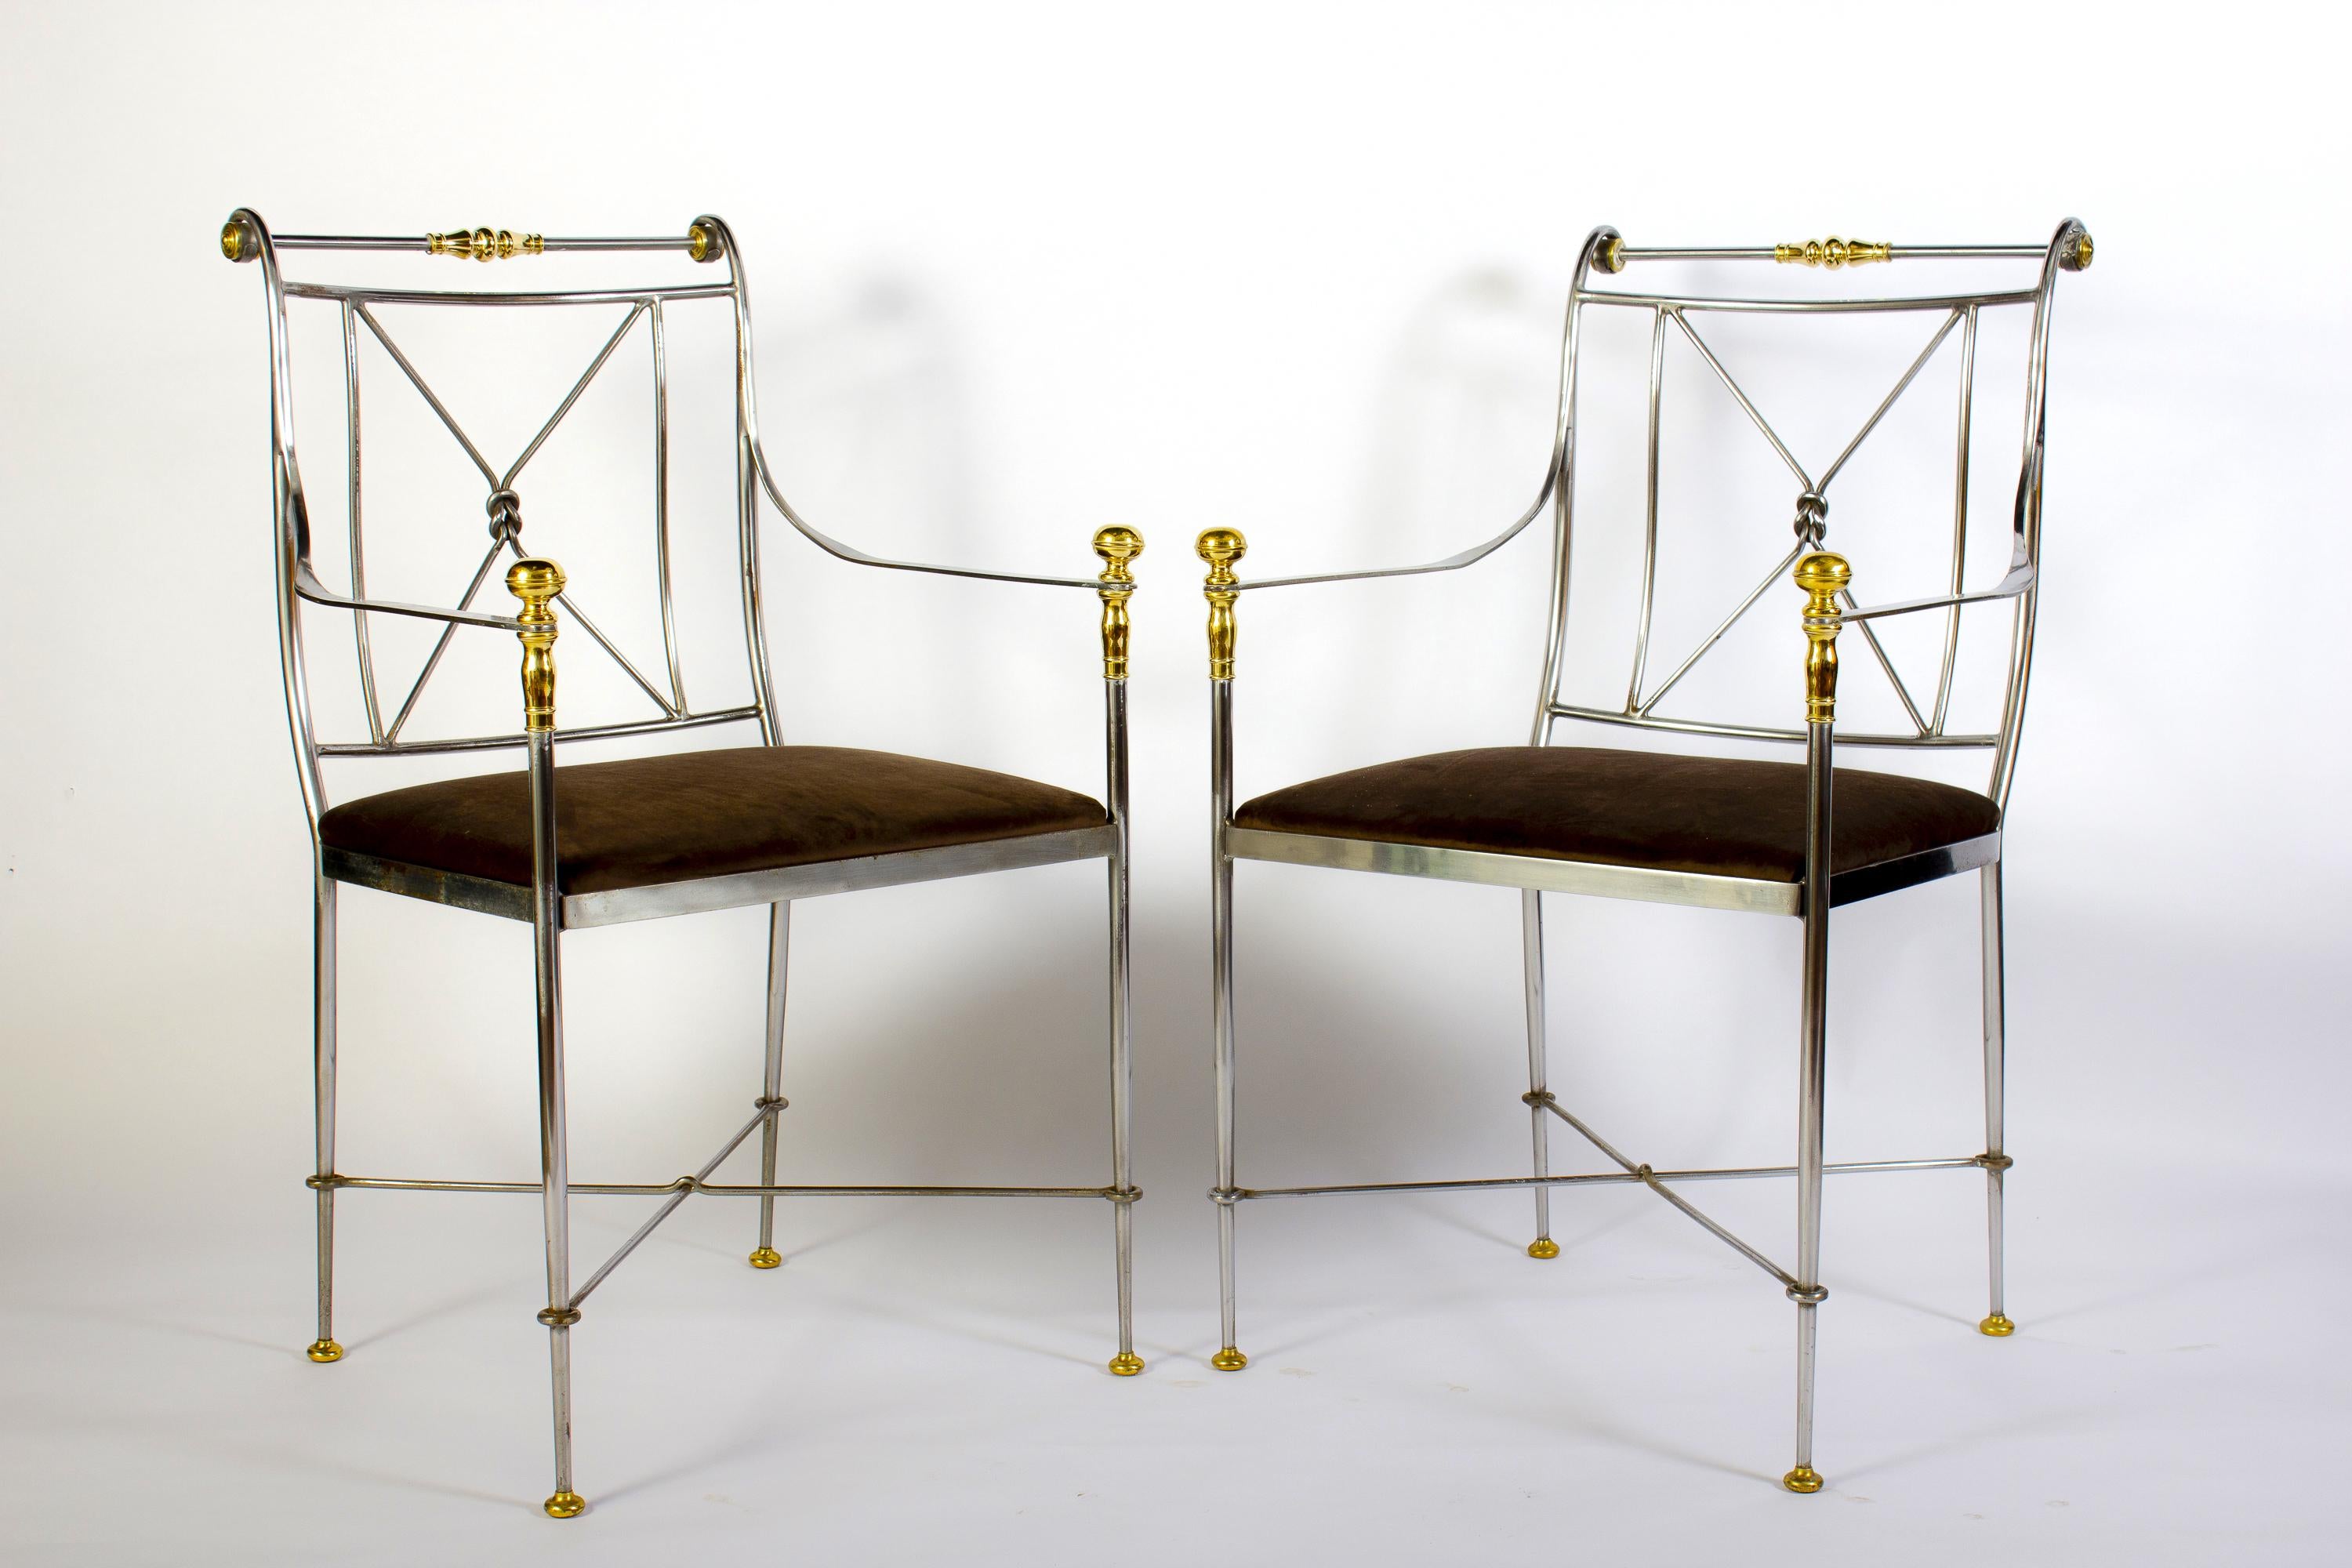 A rare vintage set of eight Italian steel and brass armchairs with dark velvet seats.
Made in Italy and featuring polished steel, solid cast brass.
Each chair has been masterfully welded, crafted, absolutely wonderful proportions and is